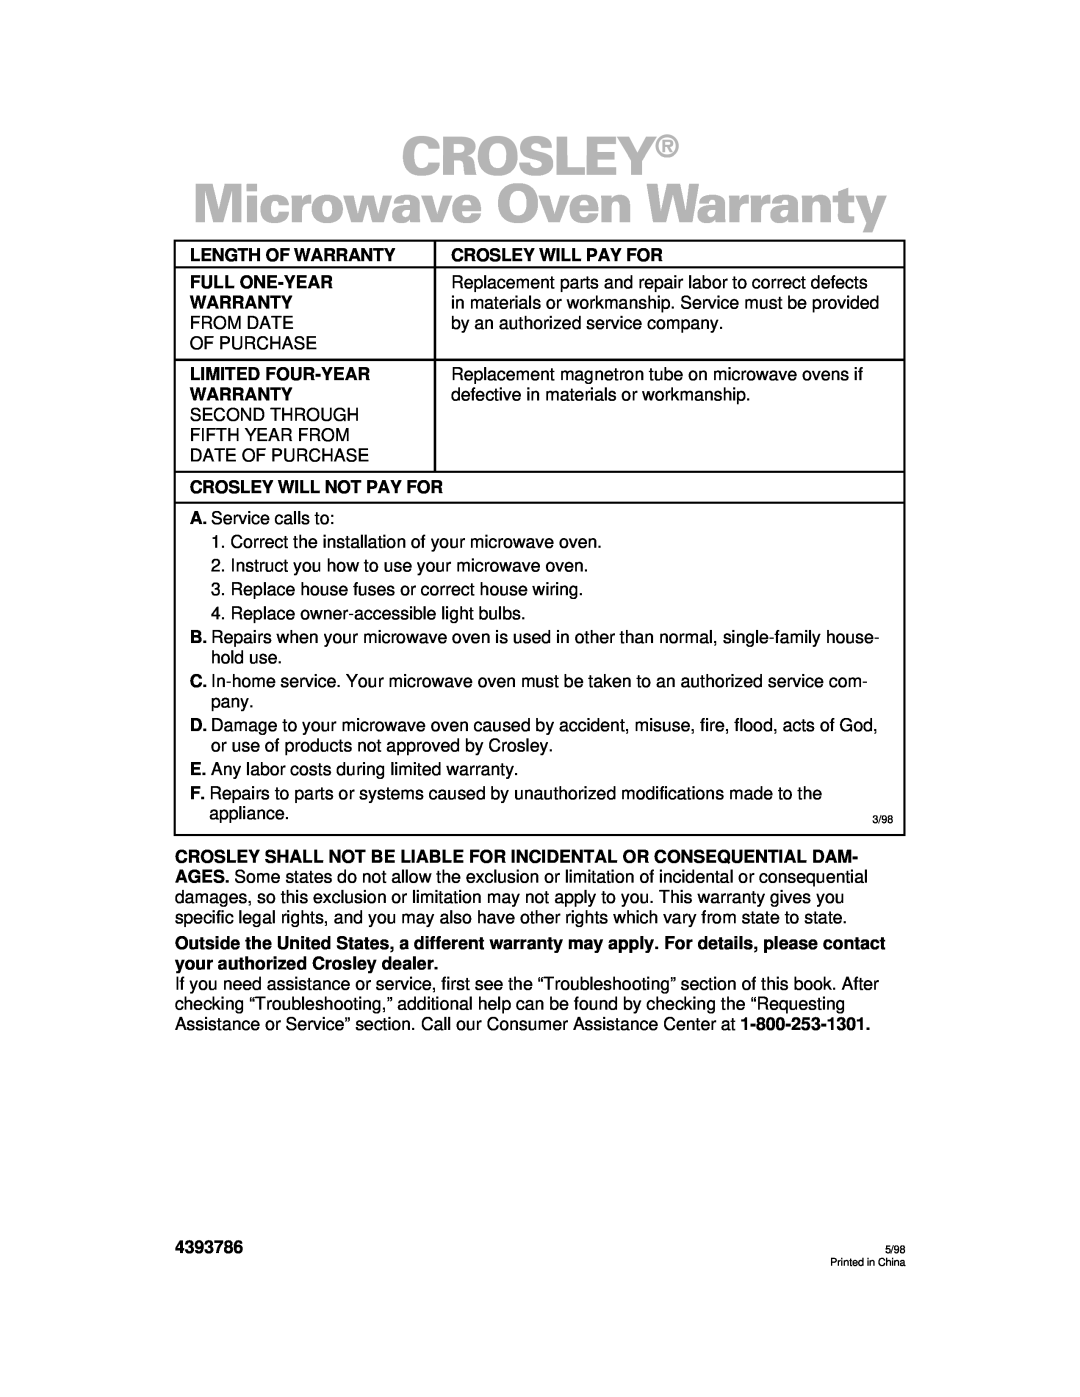 Whirlpool CMT061SG installation instructions CROSLEY Microwave Oven Warranty 